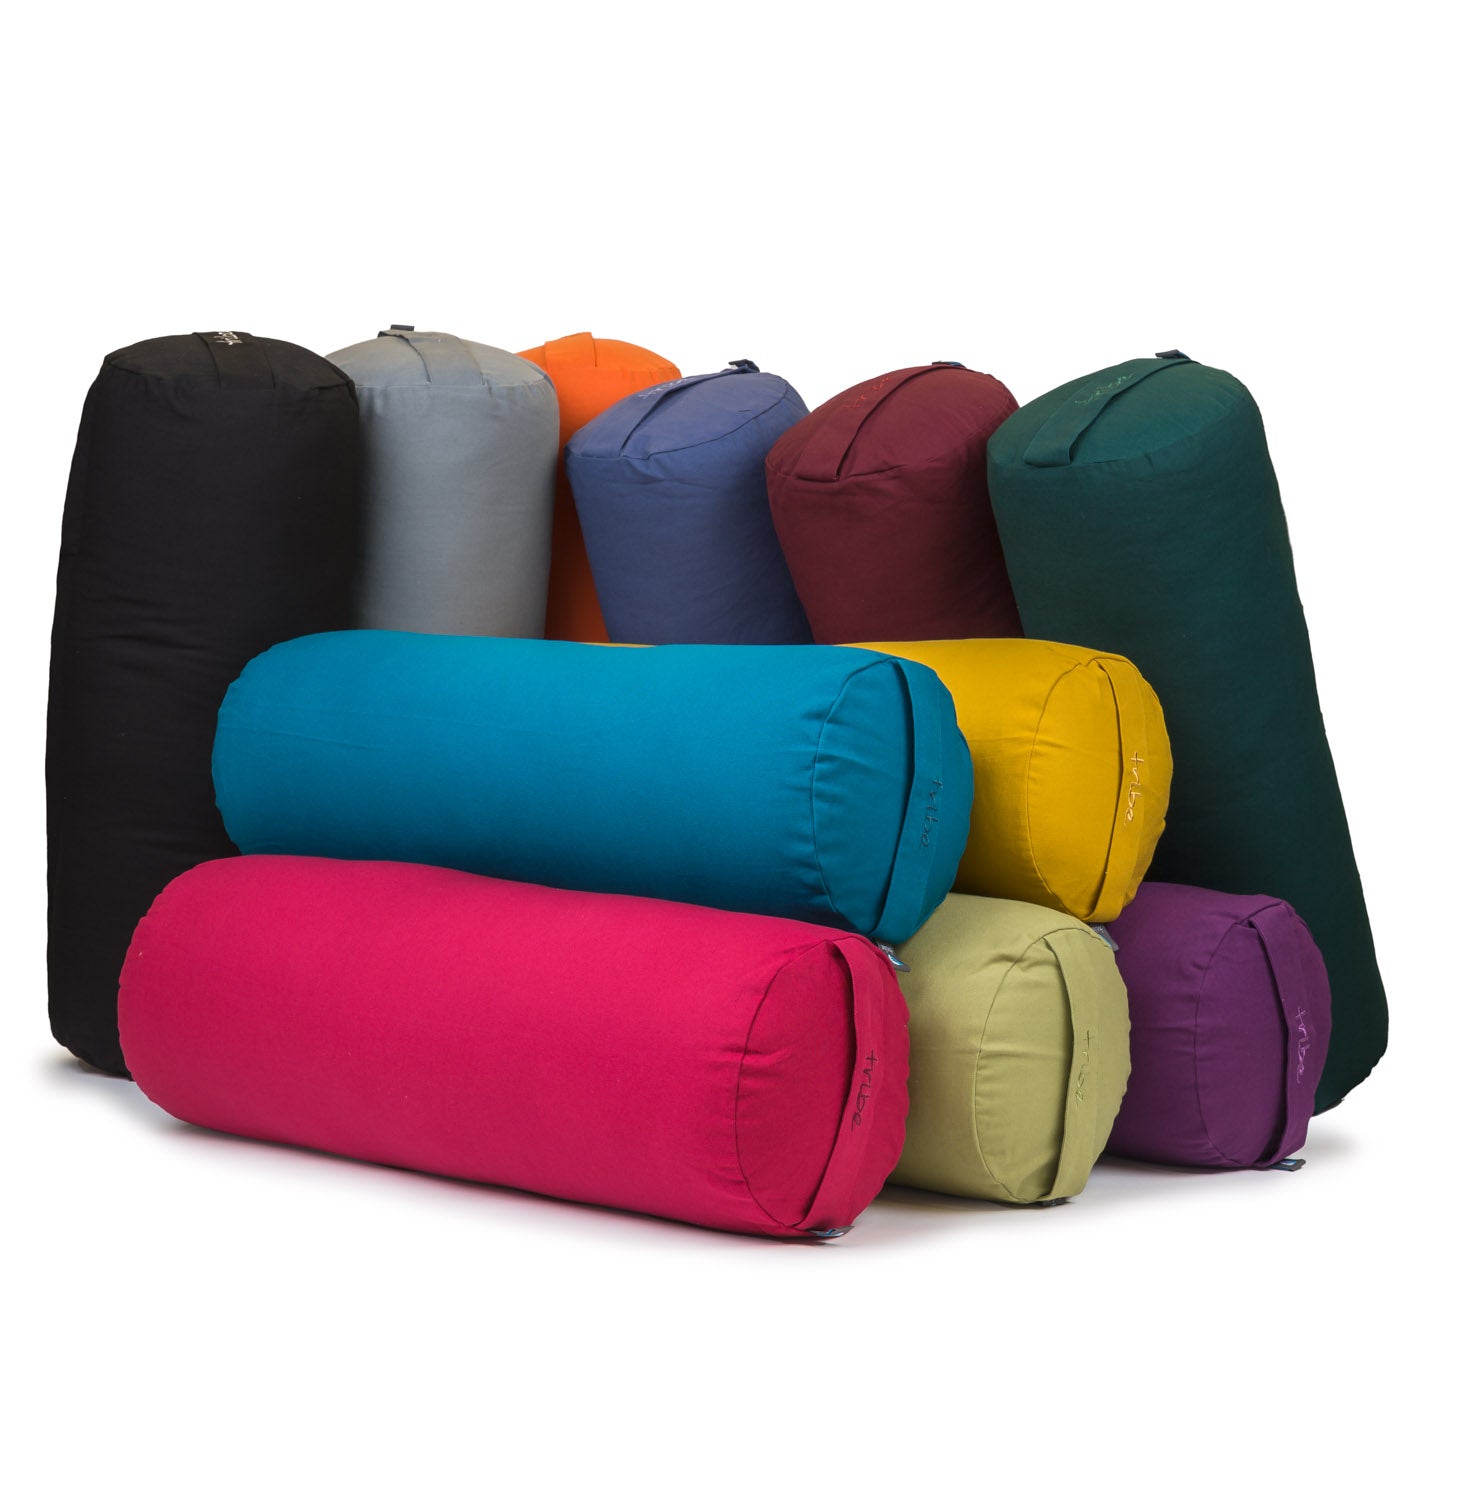 Solid Color Round Yoga Bolster Pillow by Inner Space Yoga Supplies